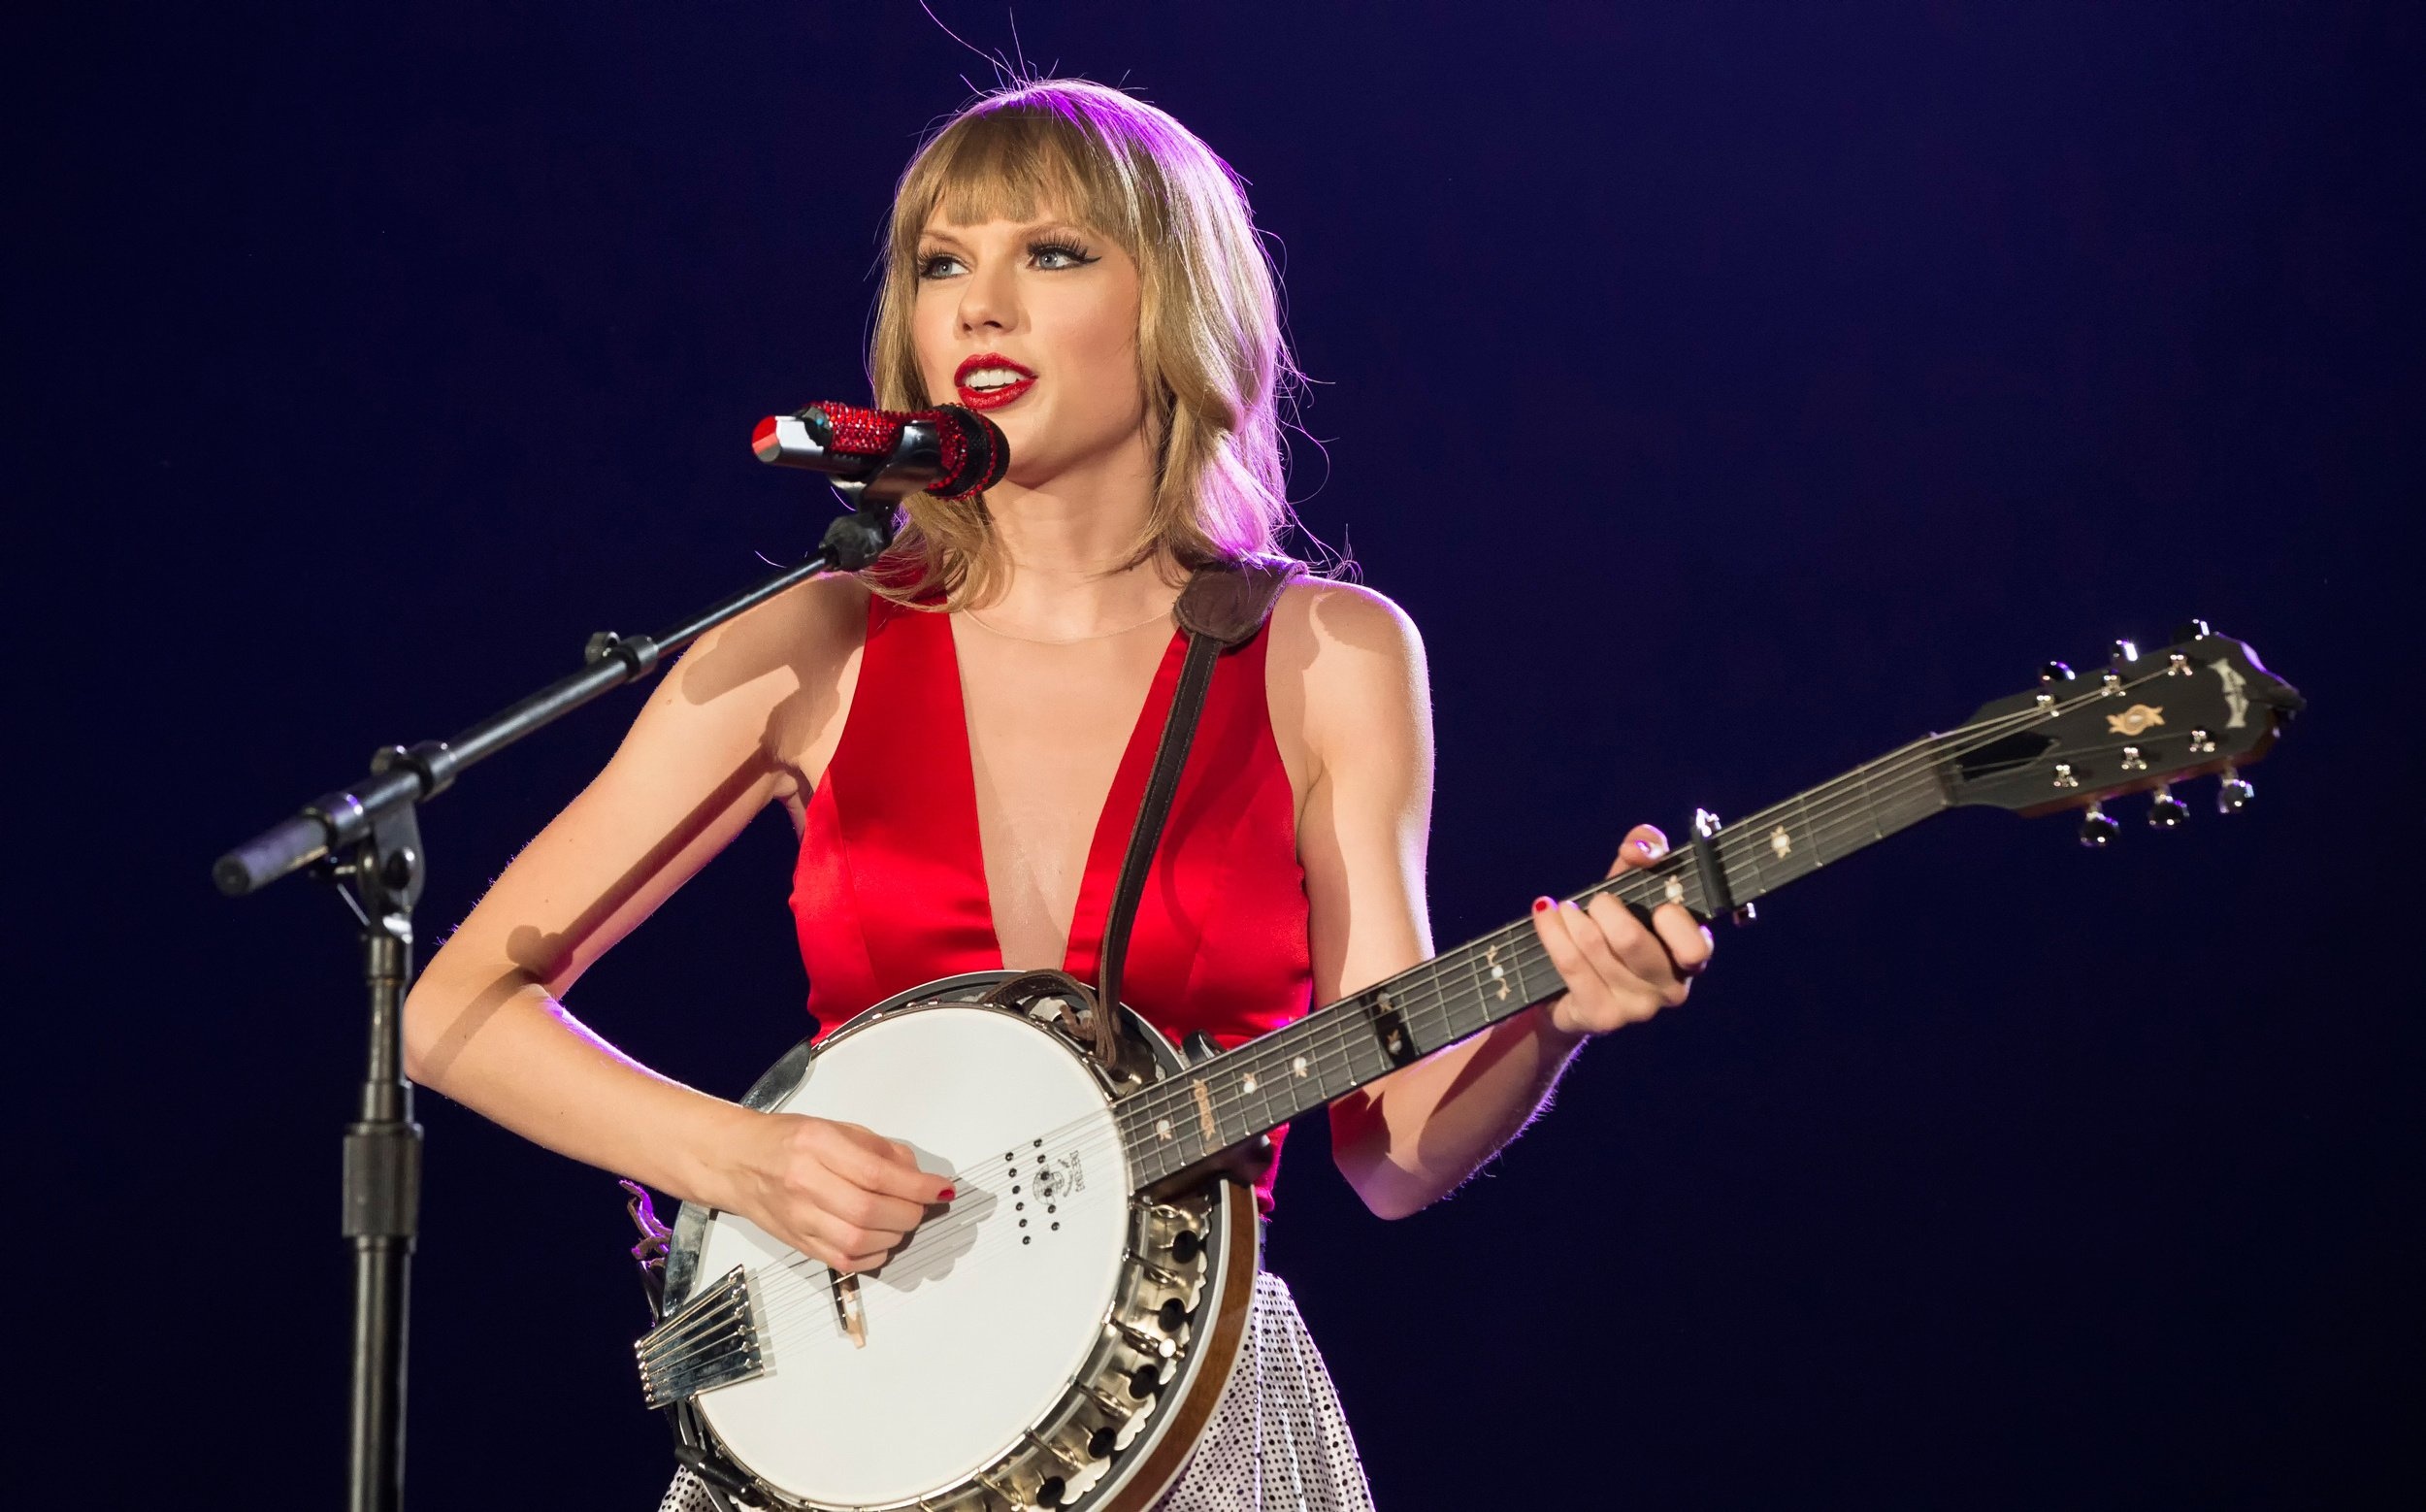 Banjo: Taylor Swift concert, A musical instrument like a small guitar with a round body. 2500x1560 HD Background.